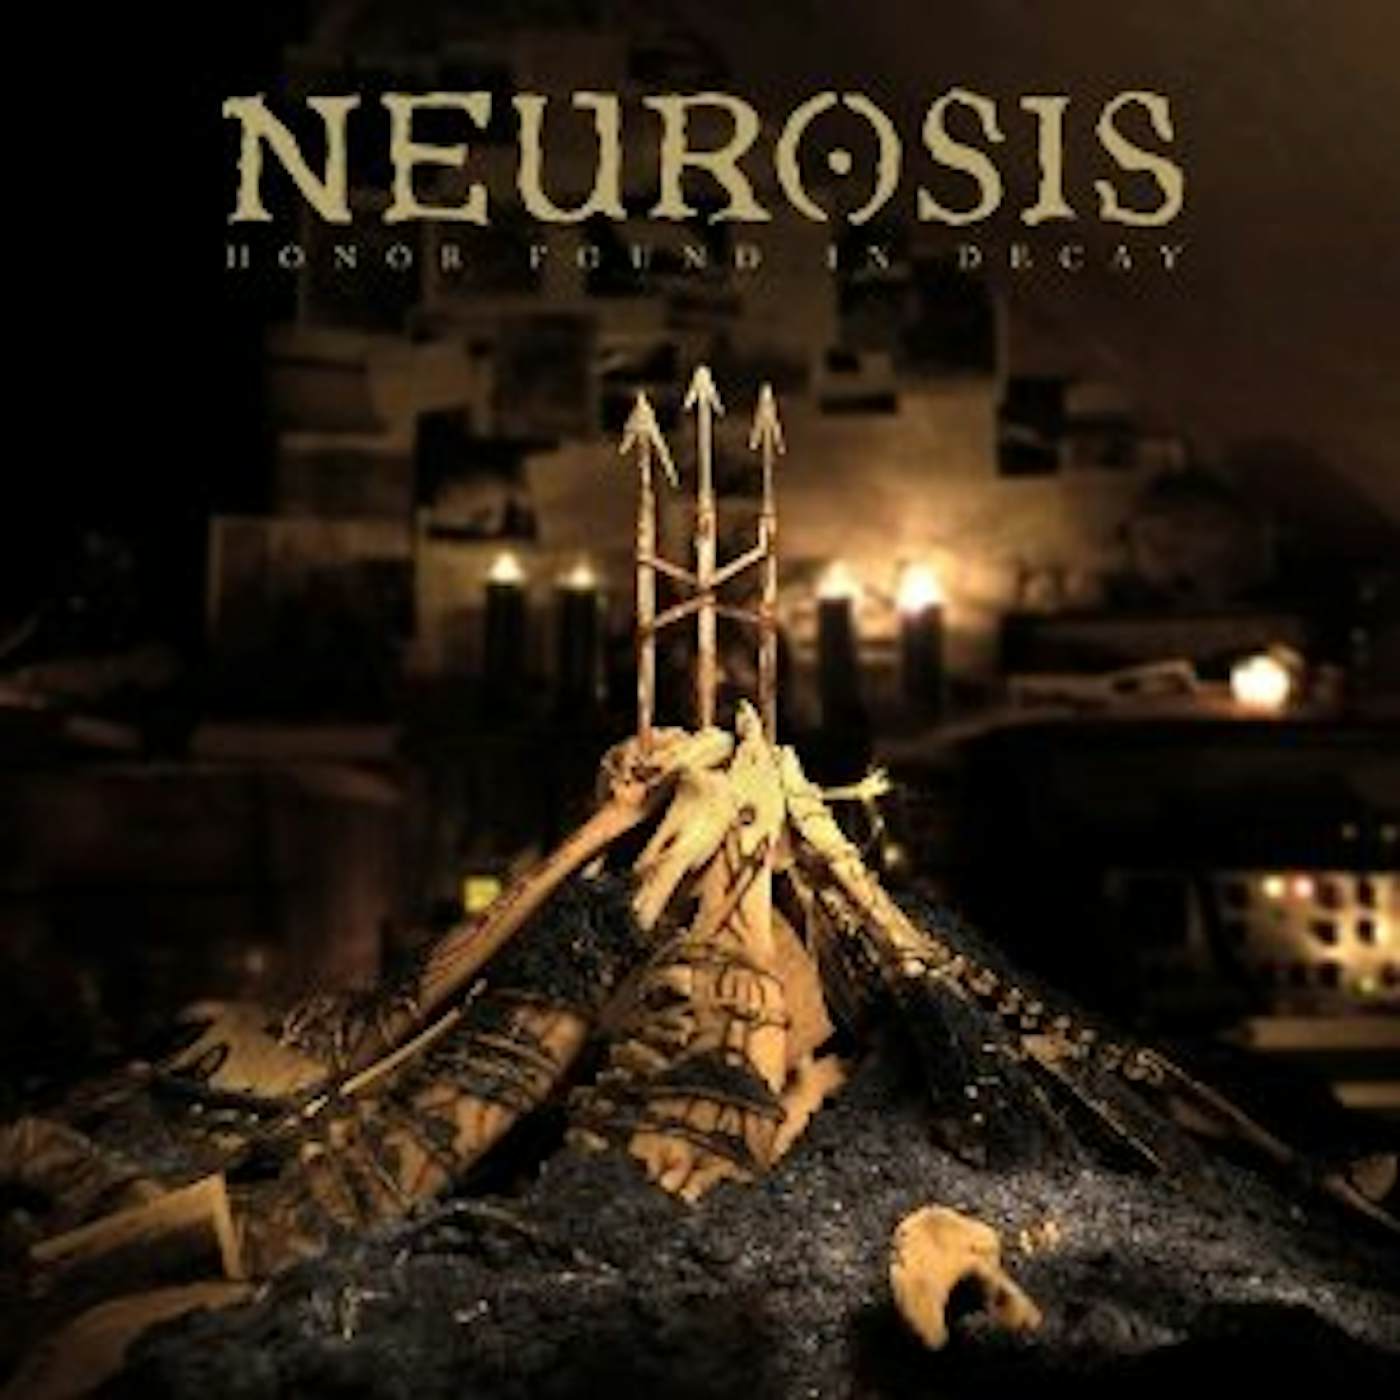 Neurosis HONOR FOUND IN DECAY CD